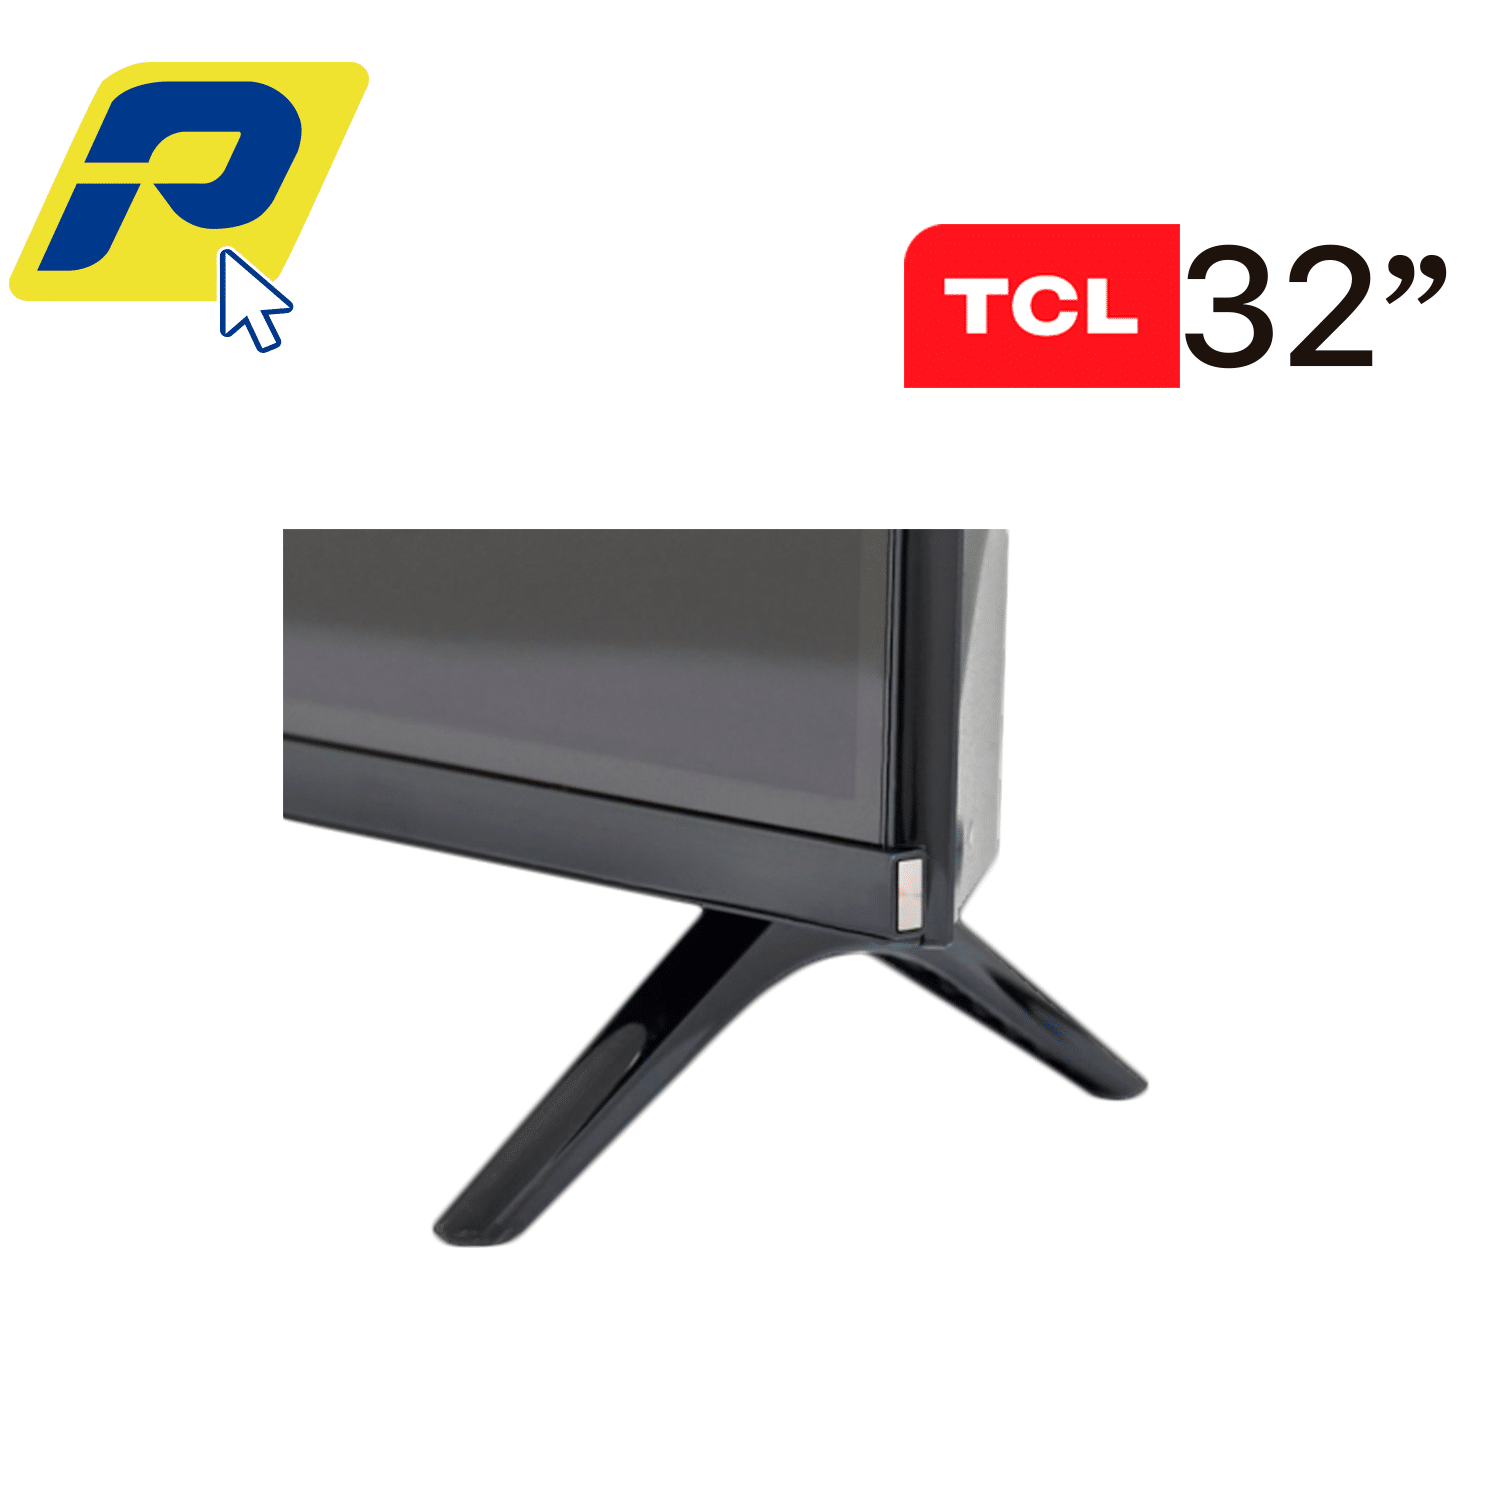 tcl 32 2